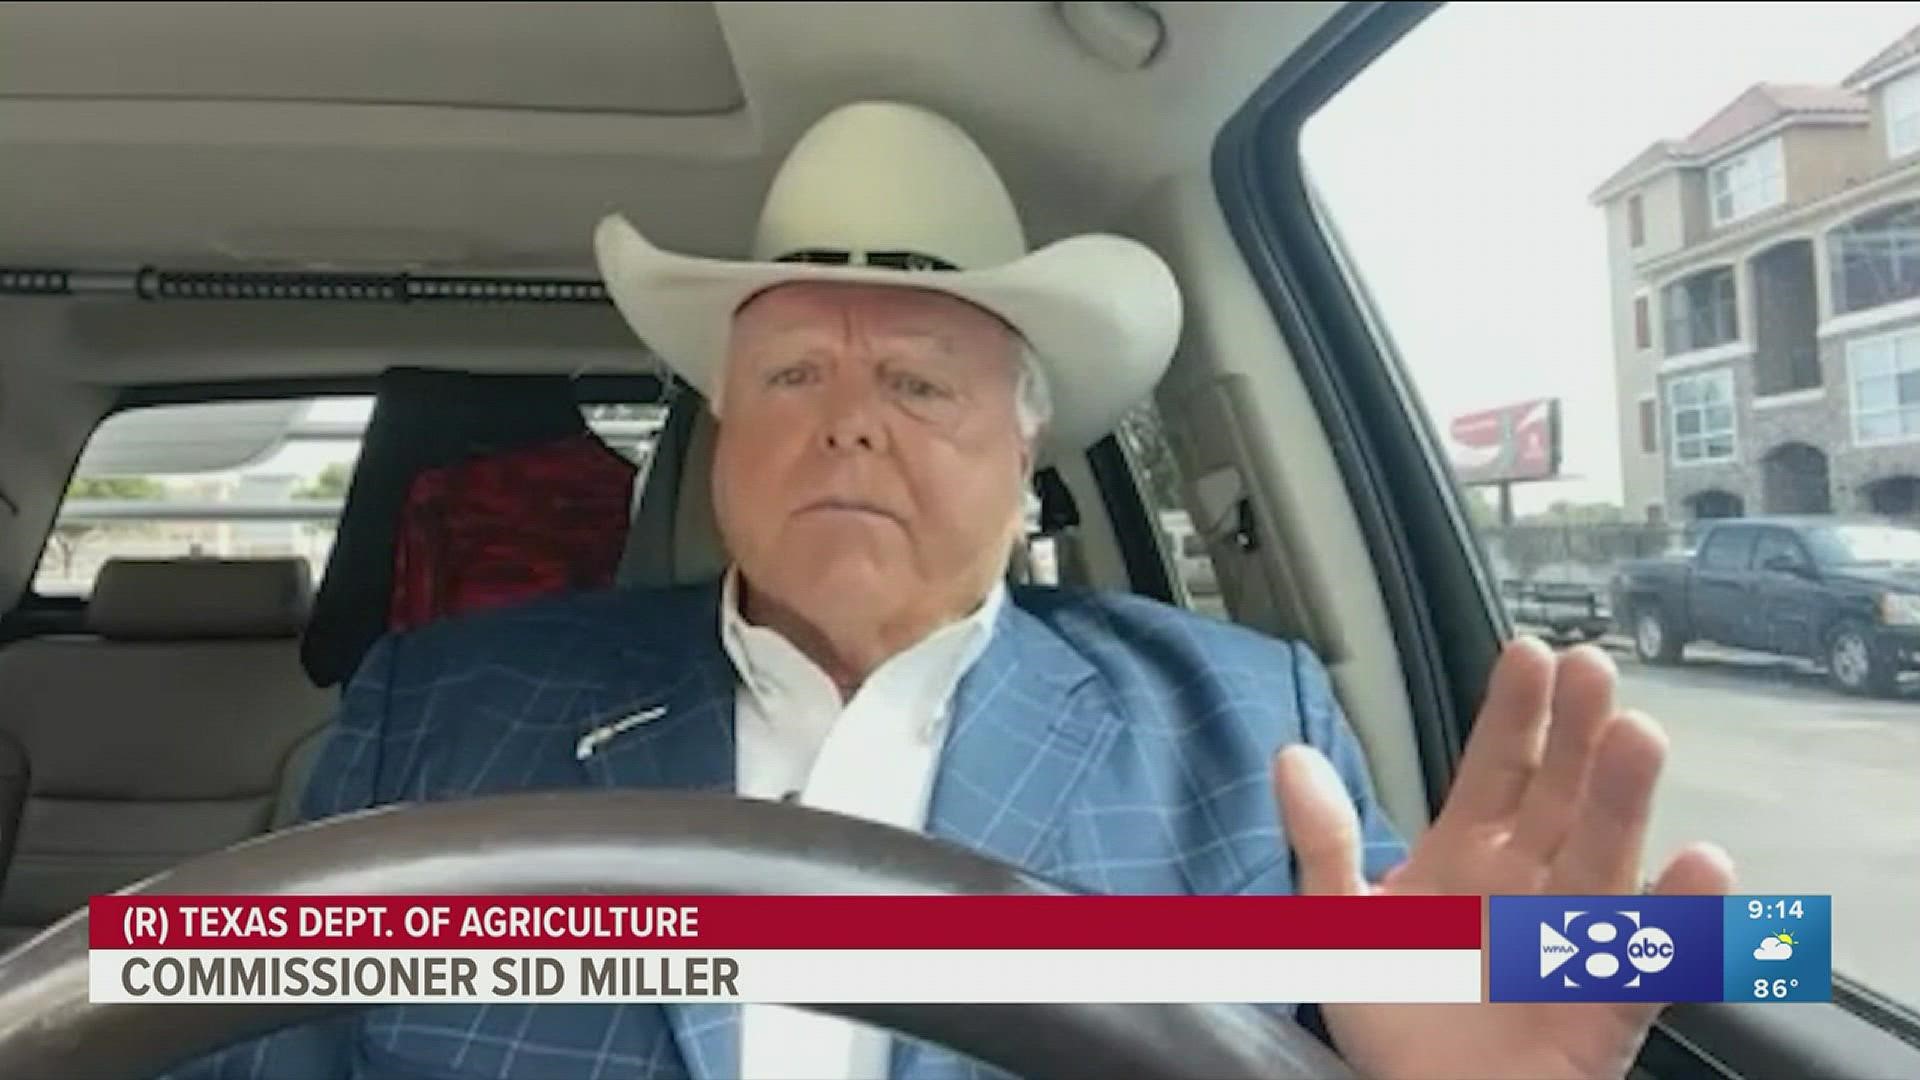 “If it’ll help a toothache, I’m for it," Texas Agriculture Commissioner Sid Miller says.